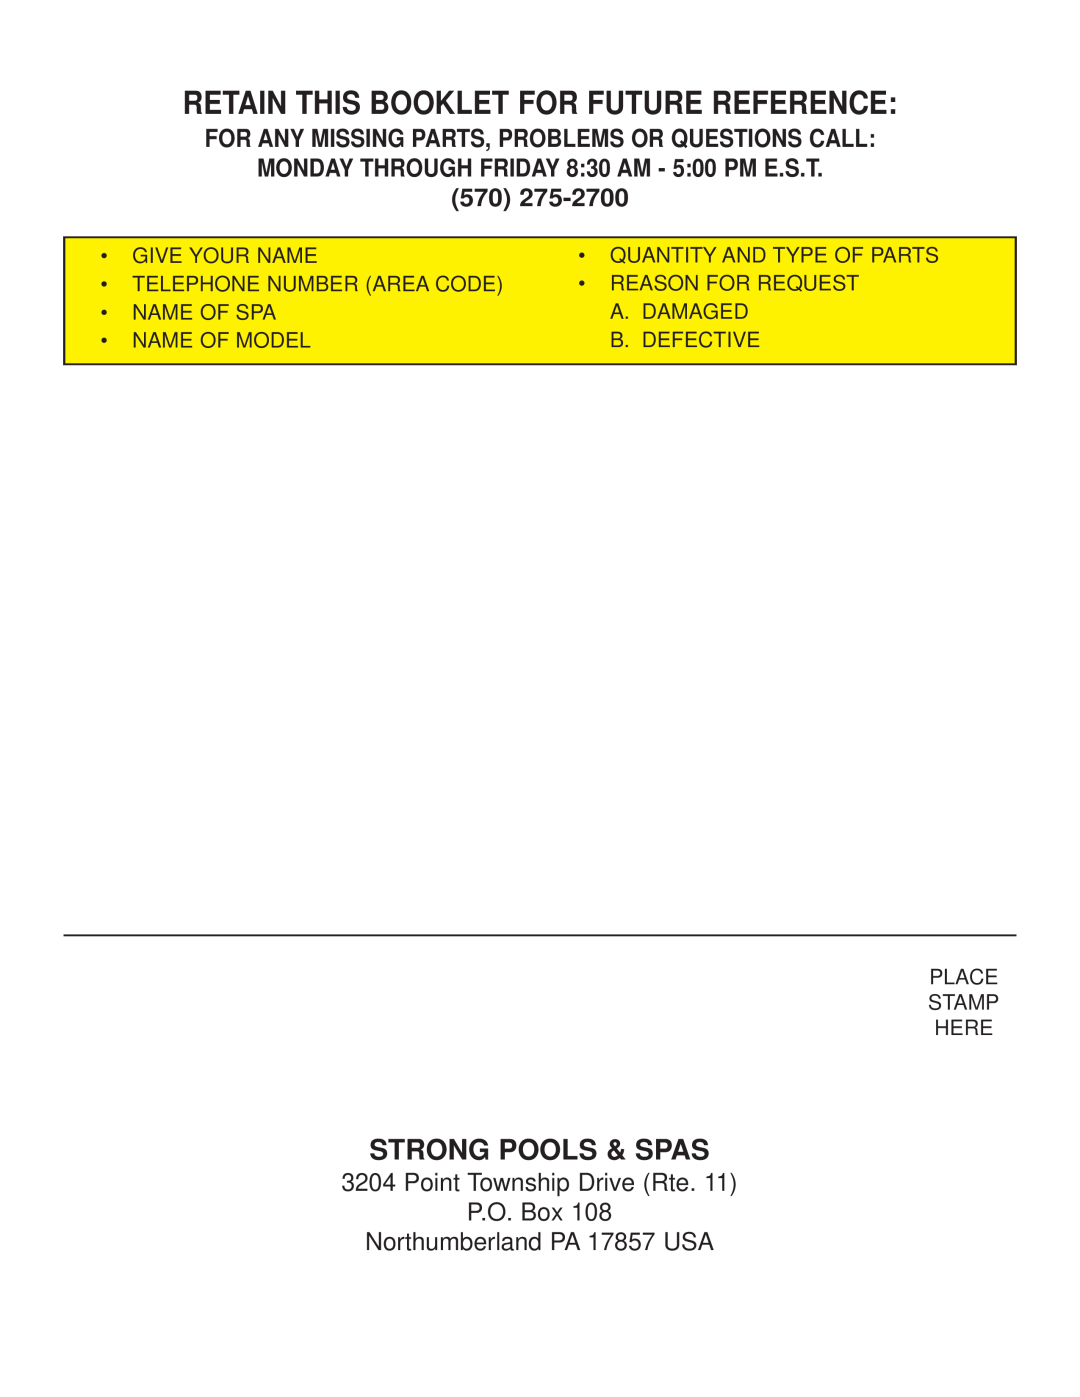 Strong Pools and Spas Maui Spa Retain This Booklet For Future Reference, For Any Missing Parts, Problems Or Questions Call 